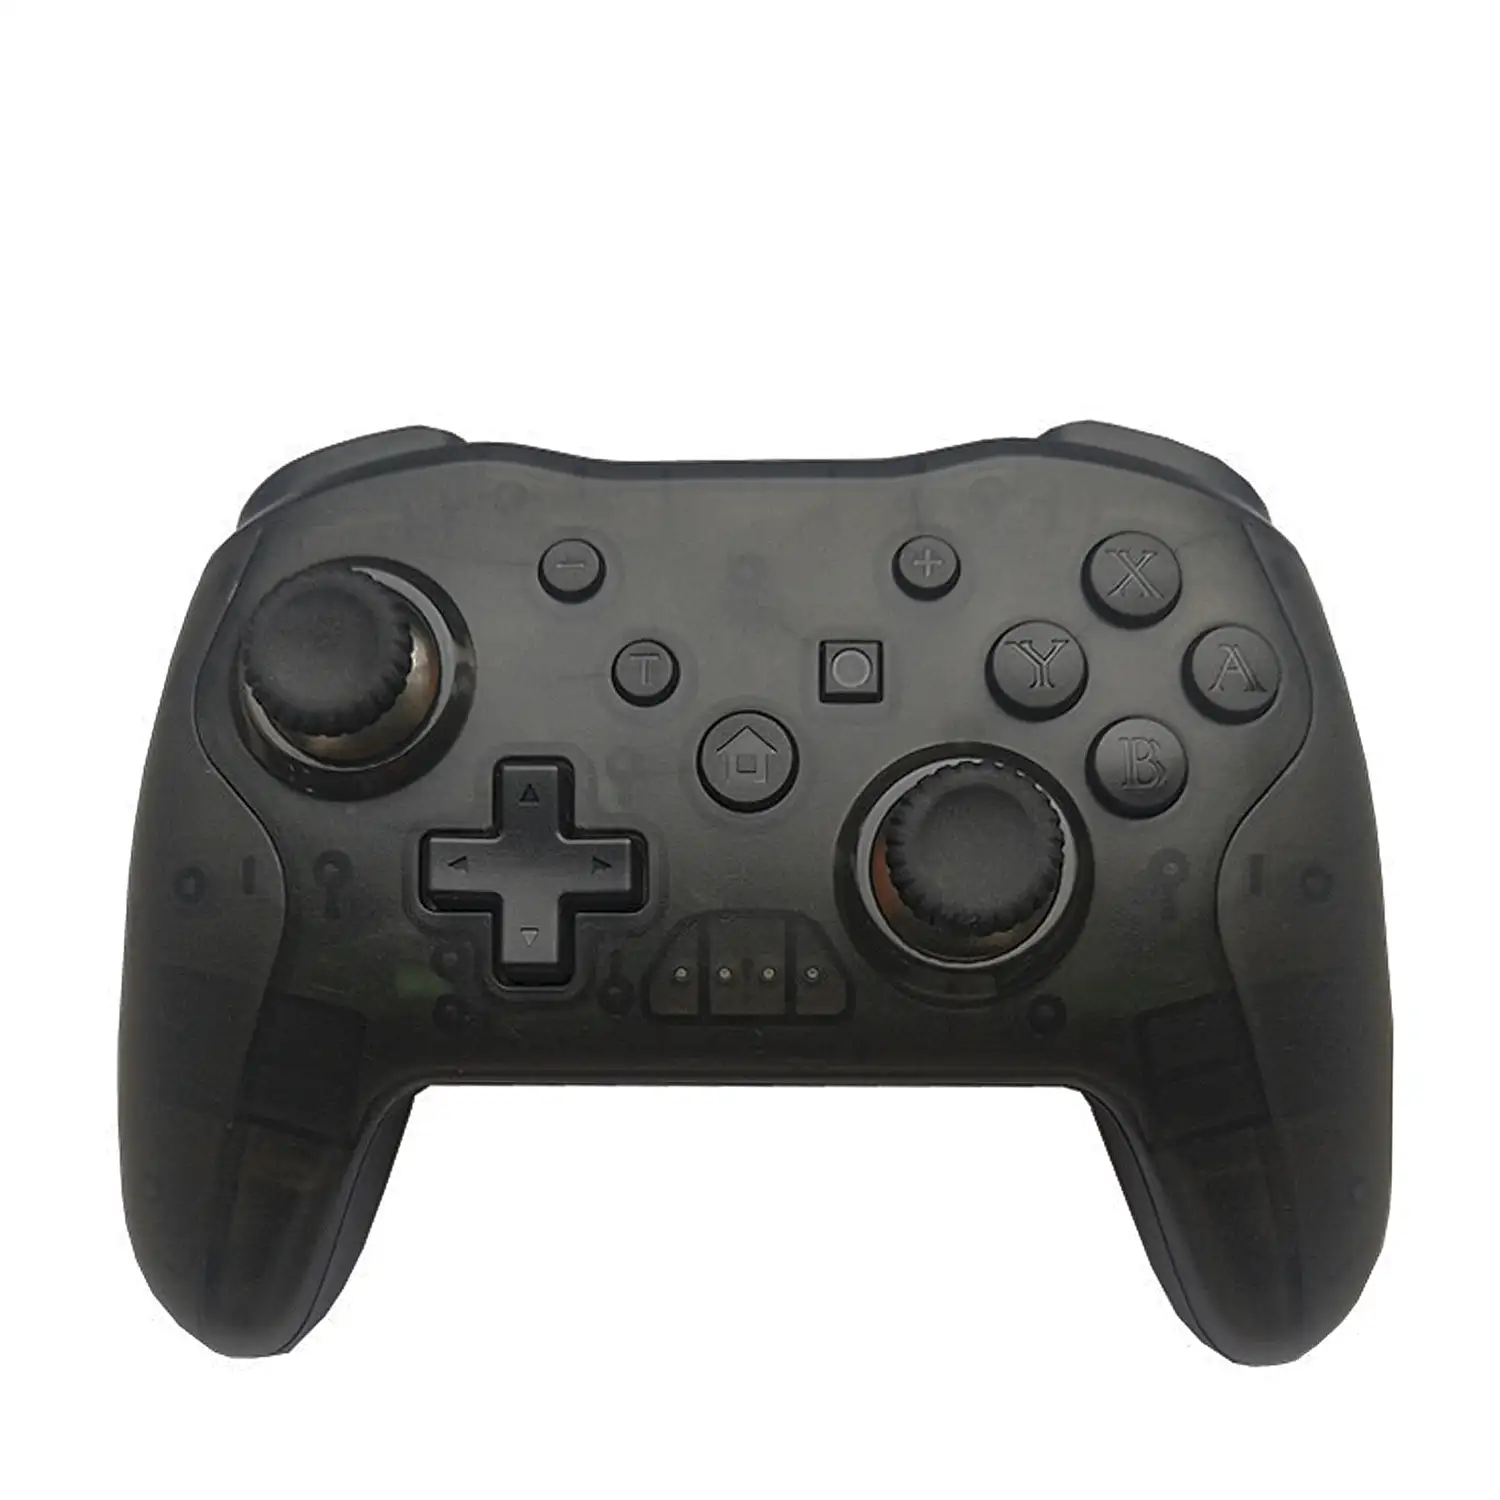 Mando inalámbrico bluetooth.Compatible con N-Switch/PS3/PC/Android